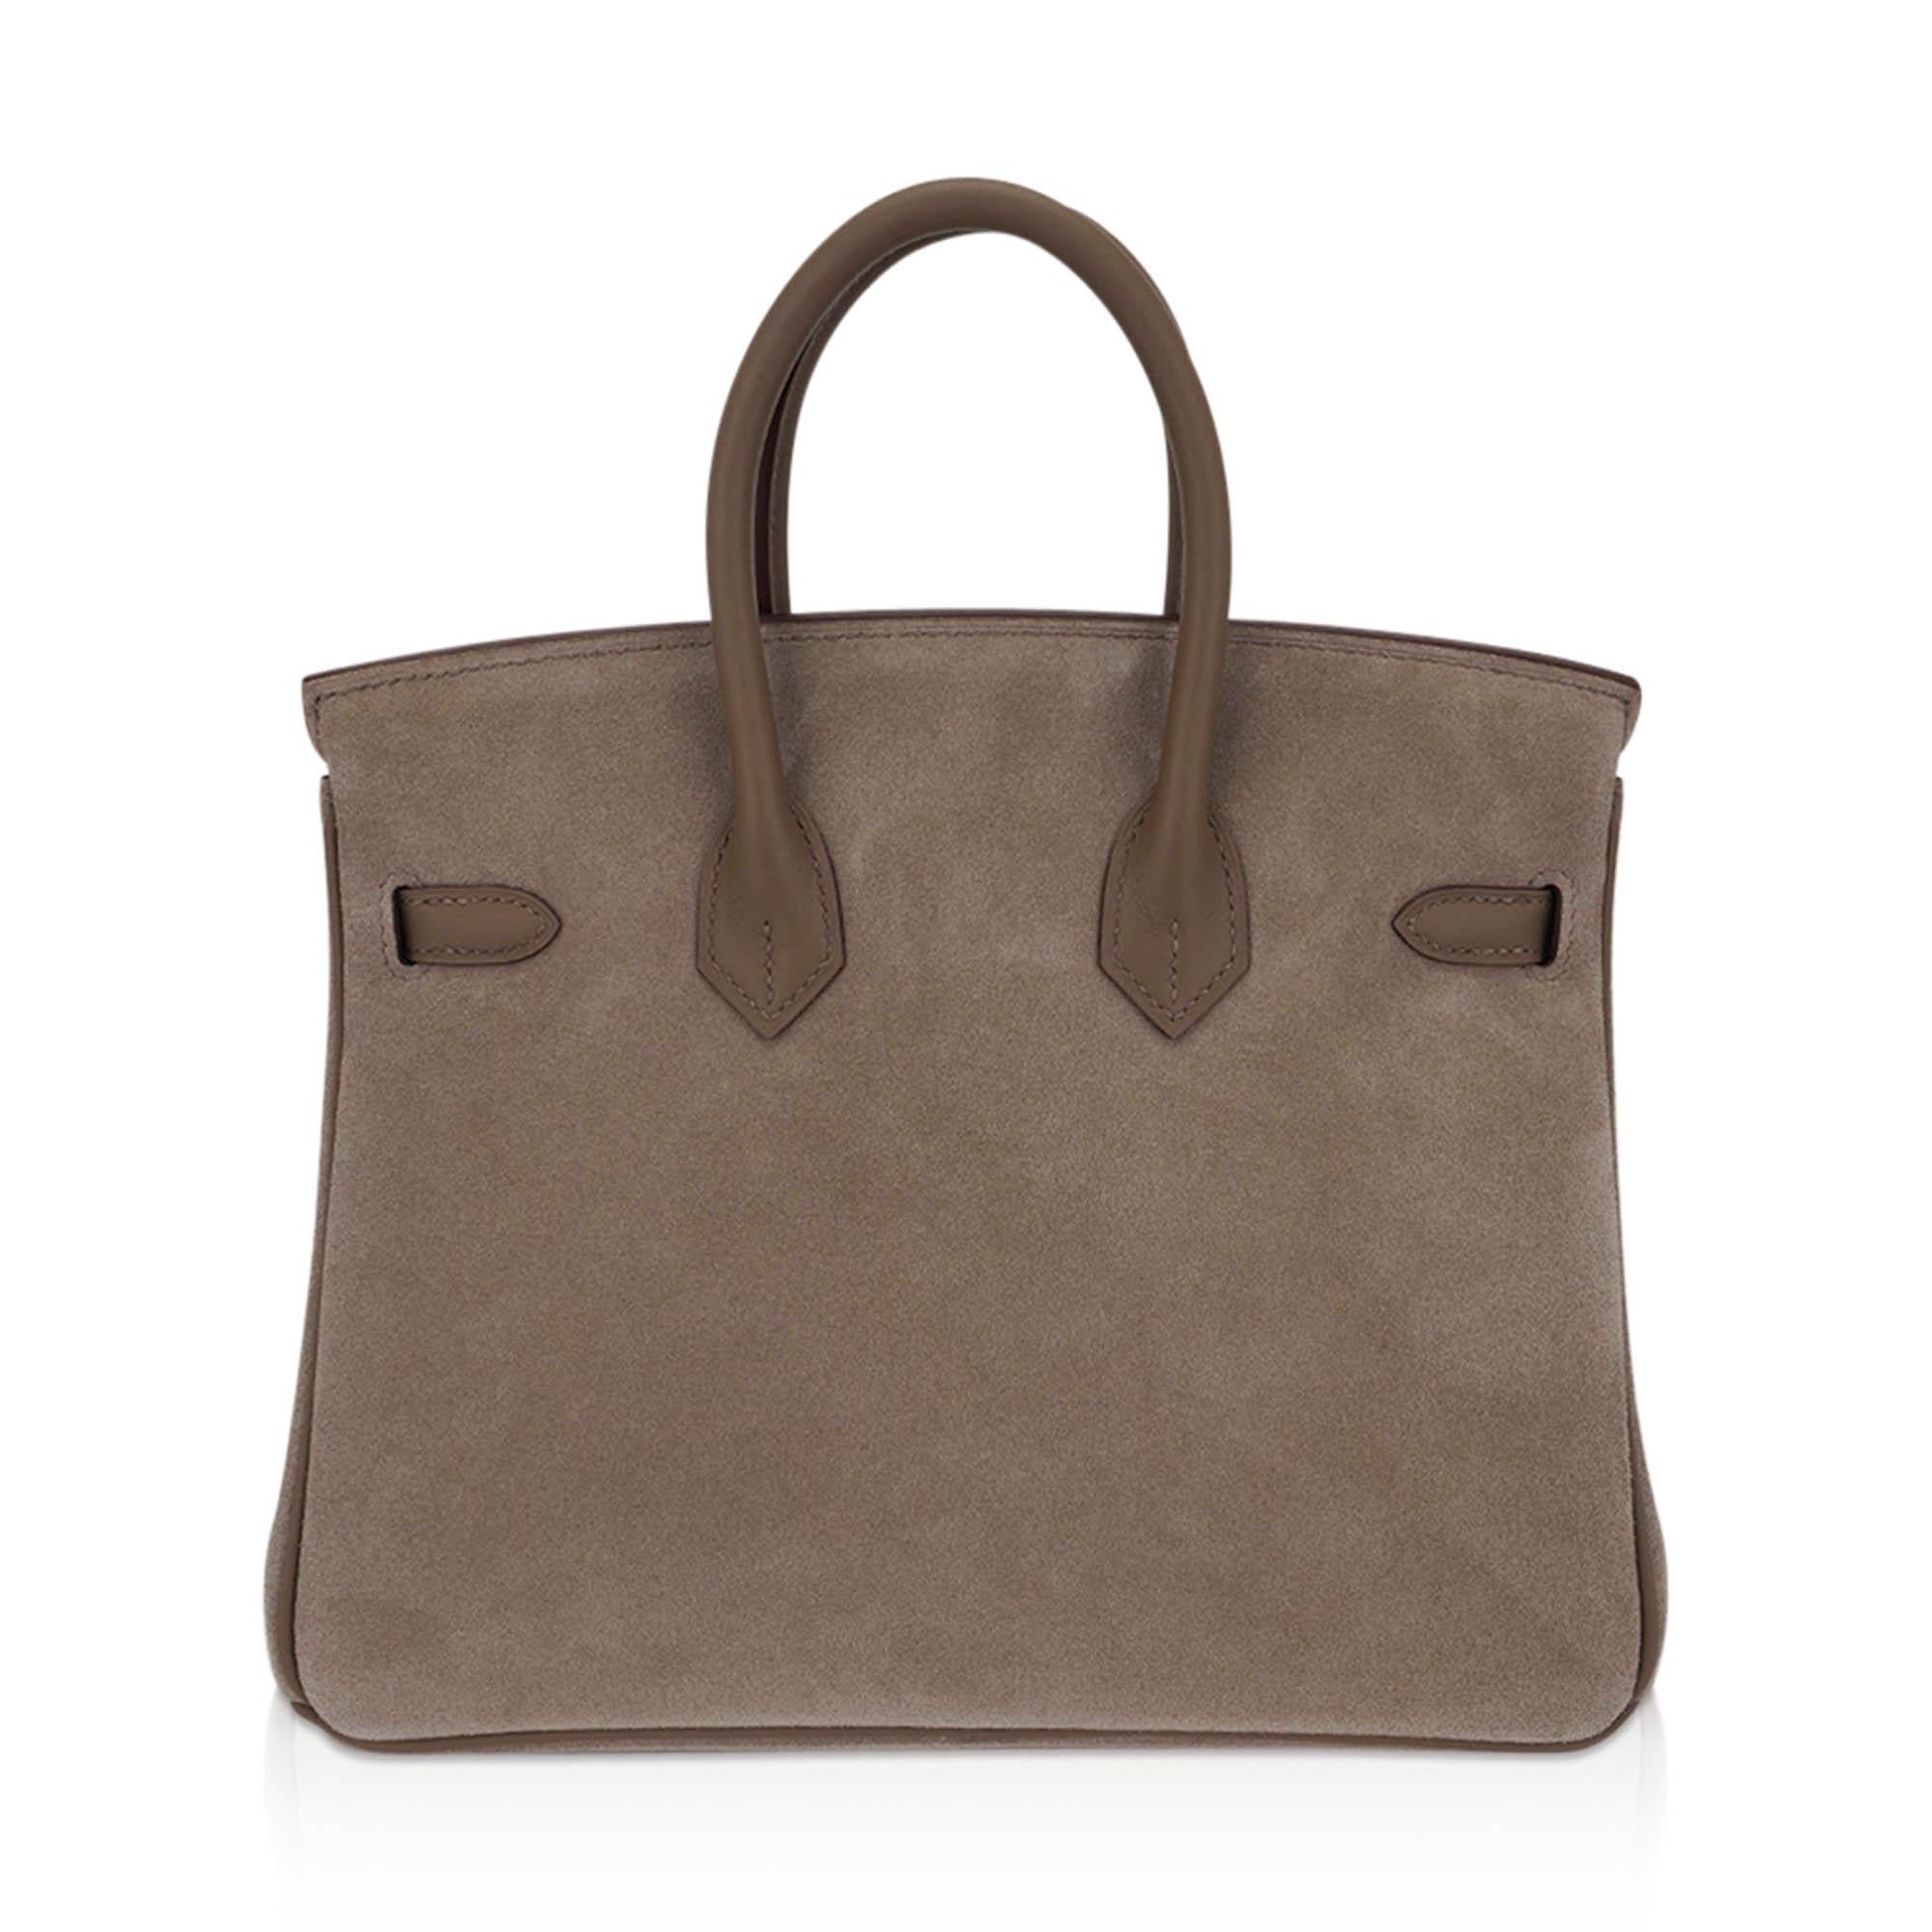 Hermes Birkin 25 Limited Edition Grizzly Gris Caillou Etoupe Swift Leather Bag For Sale 3